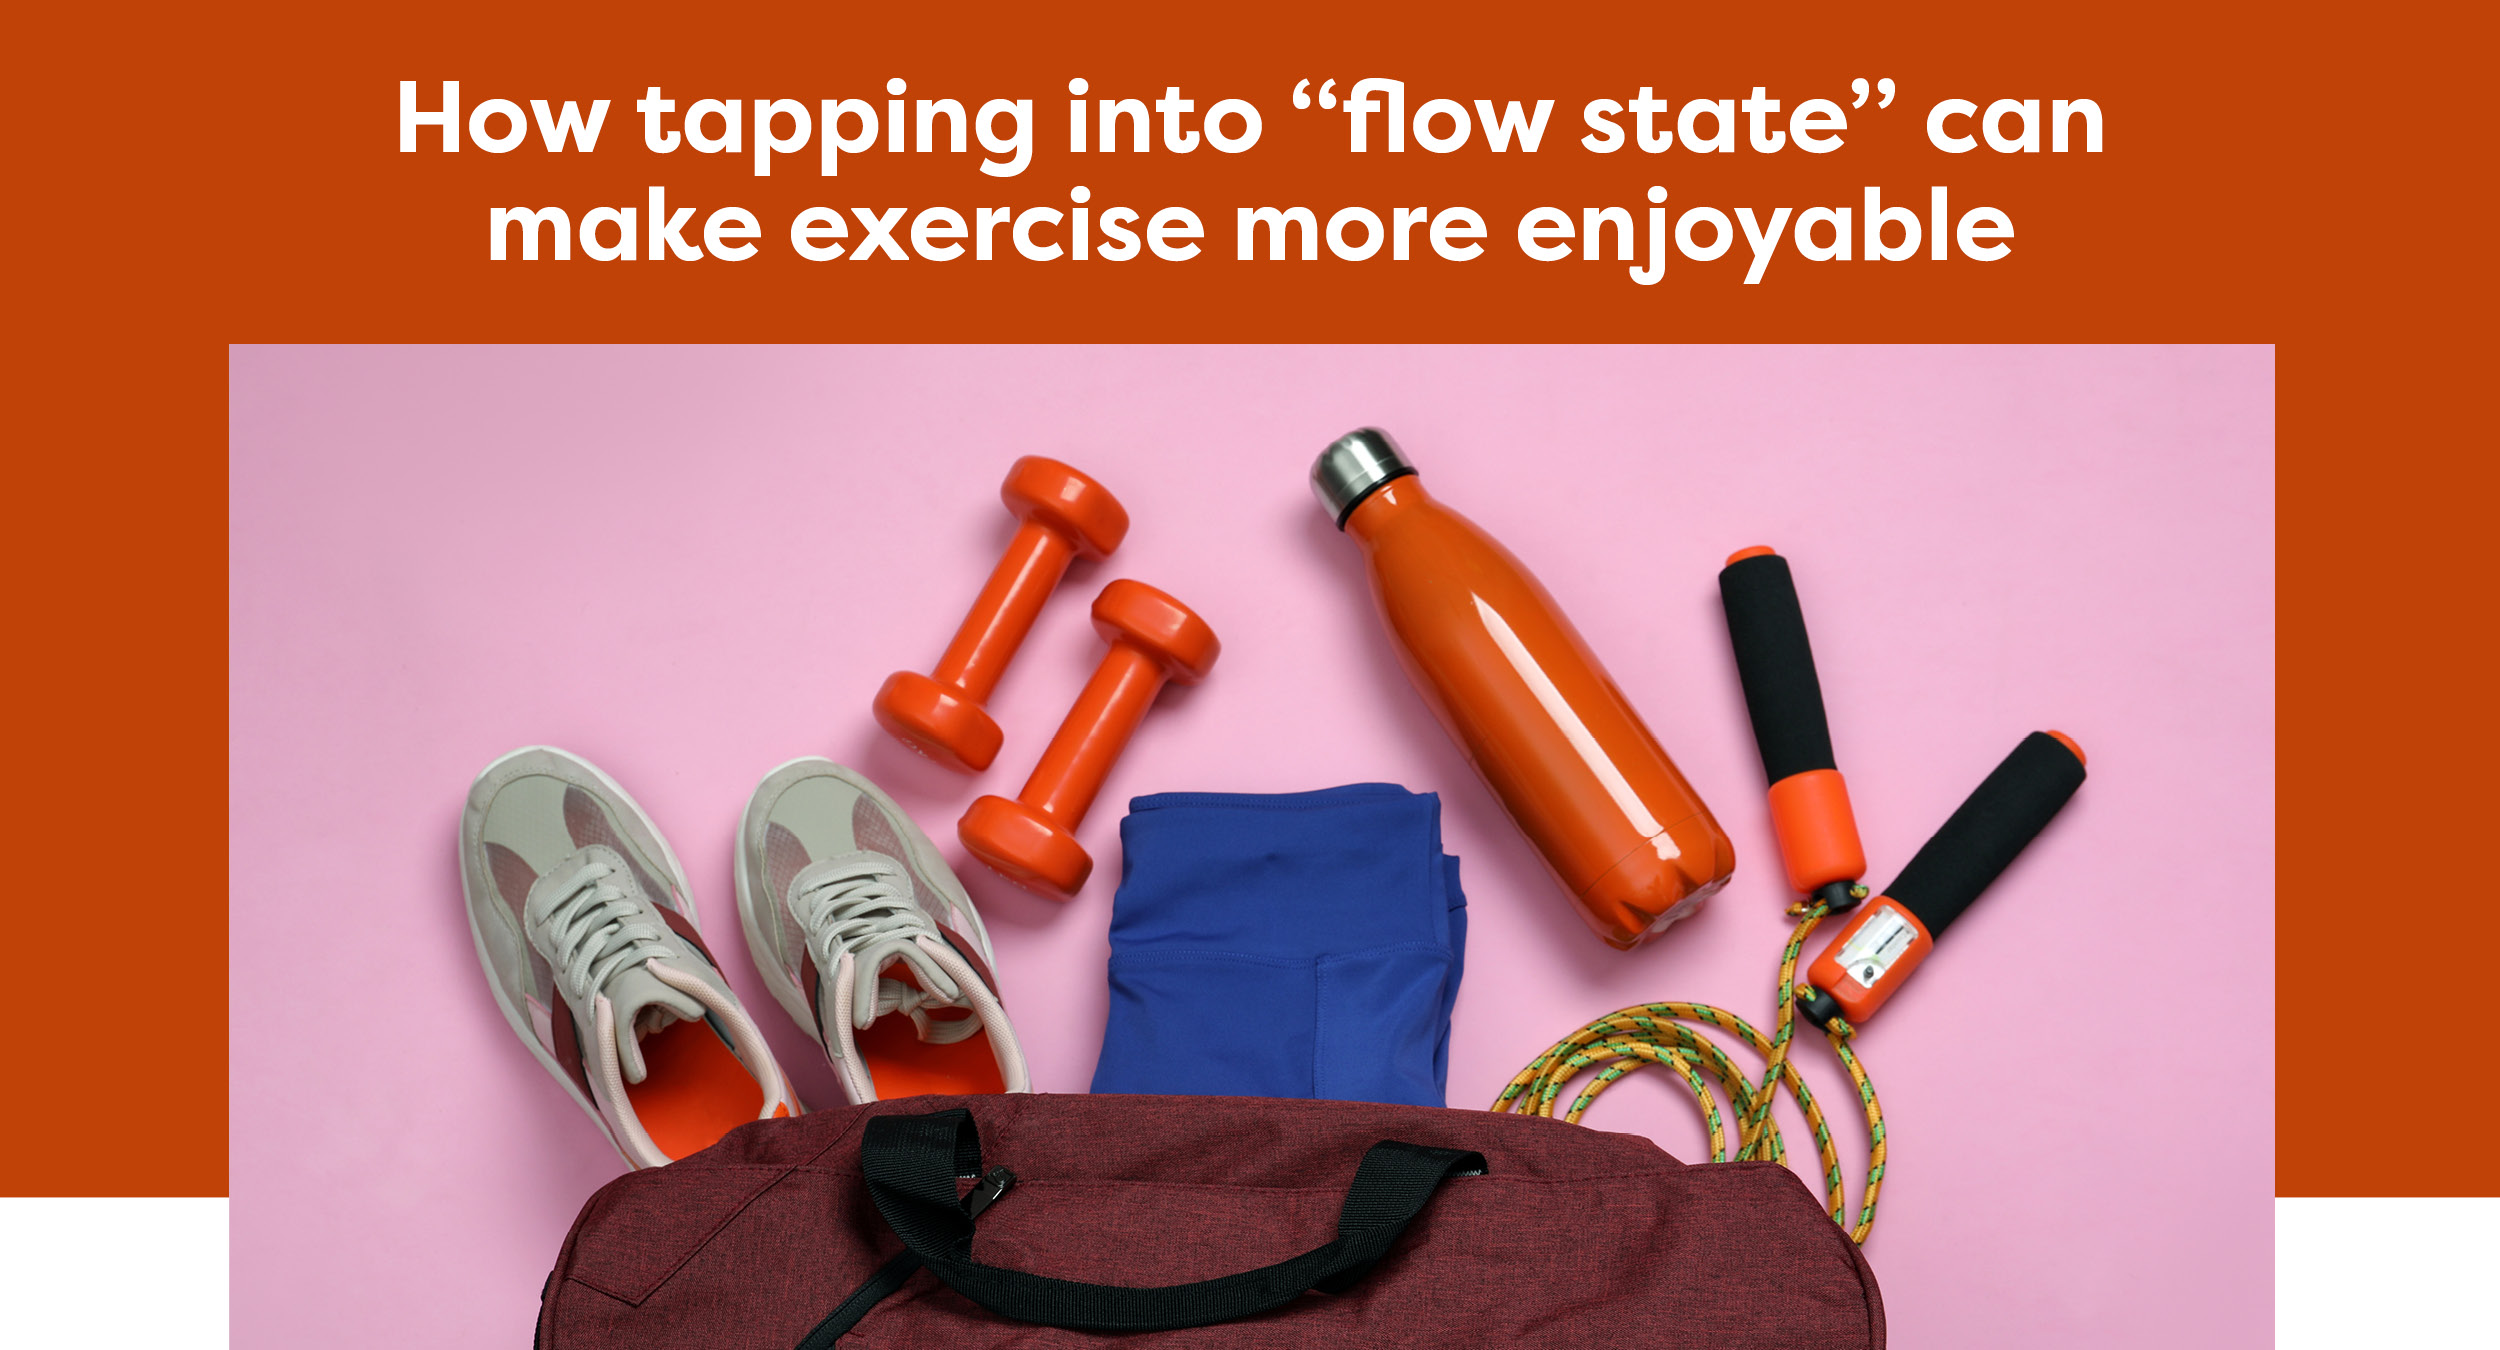 How tapping into "flow state" can make exercise more enjoyable